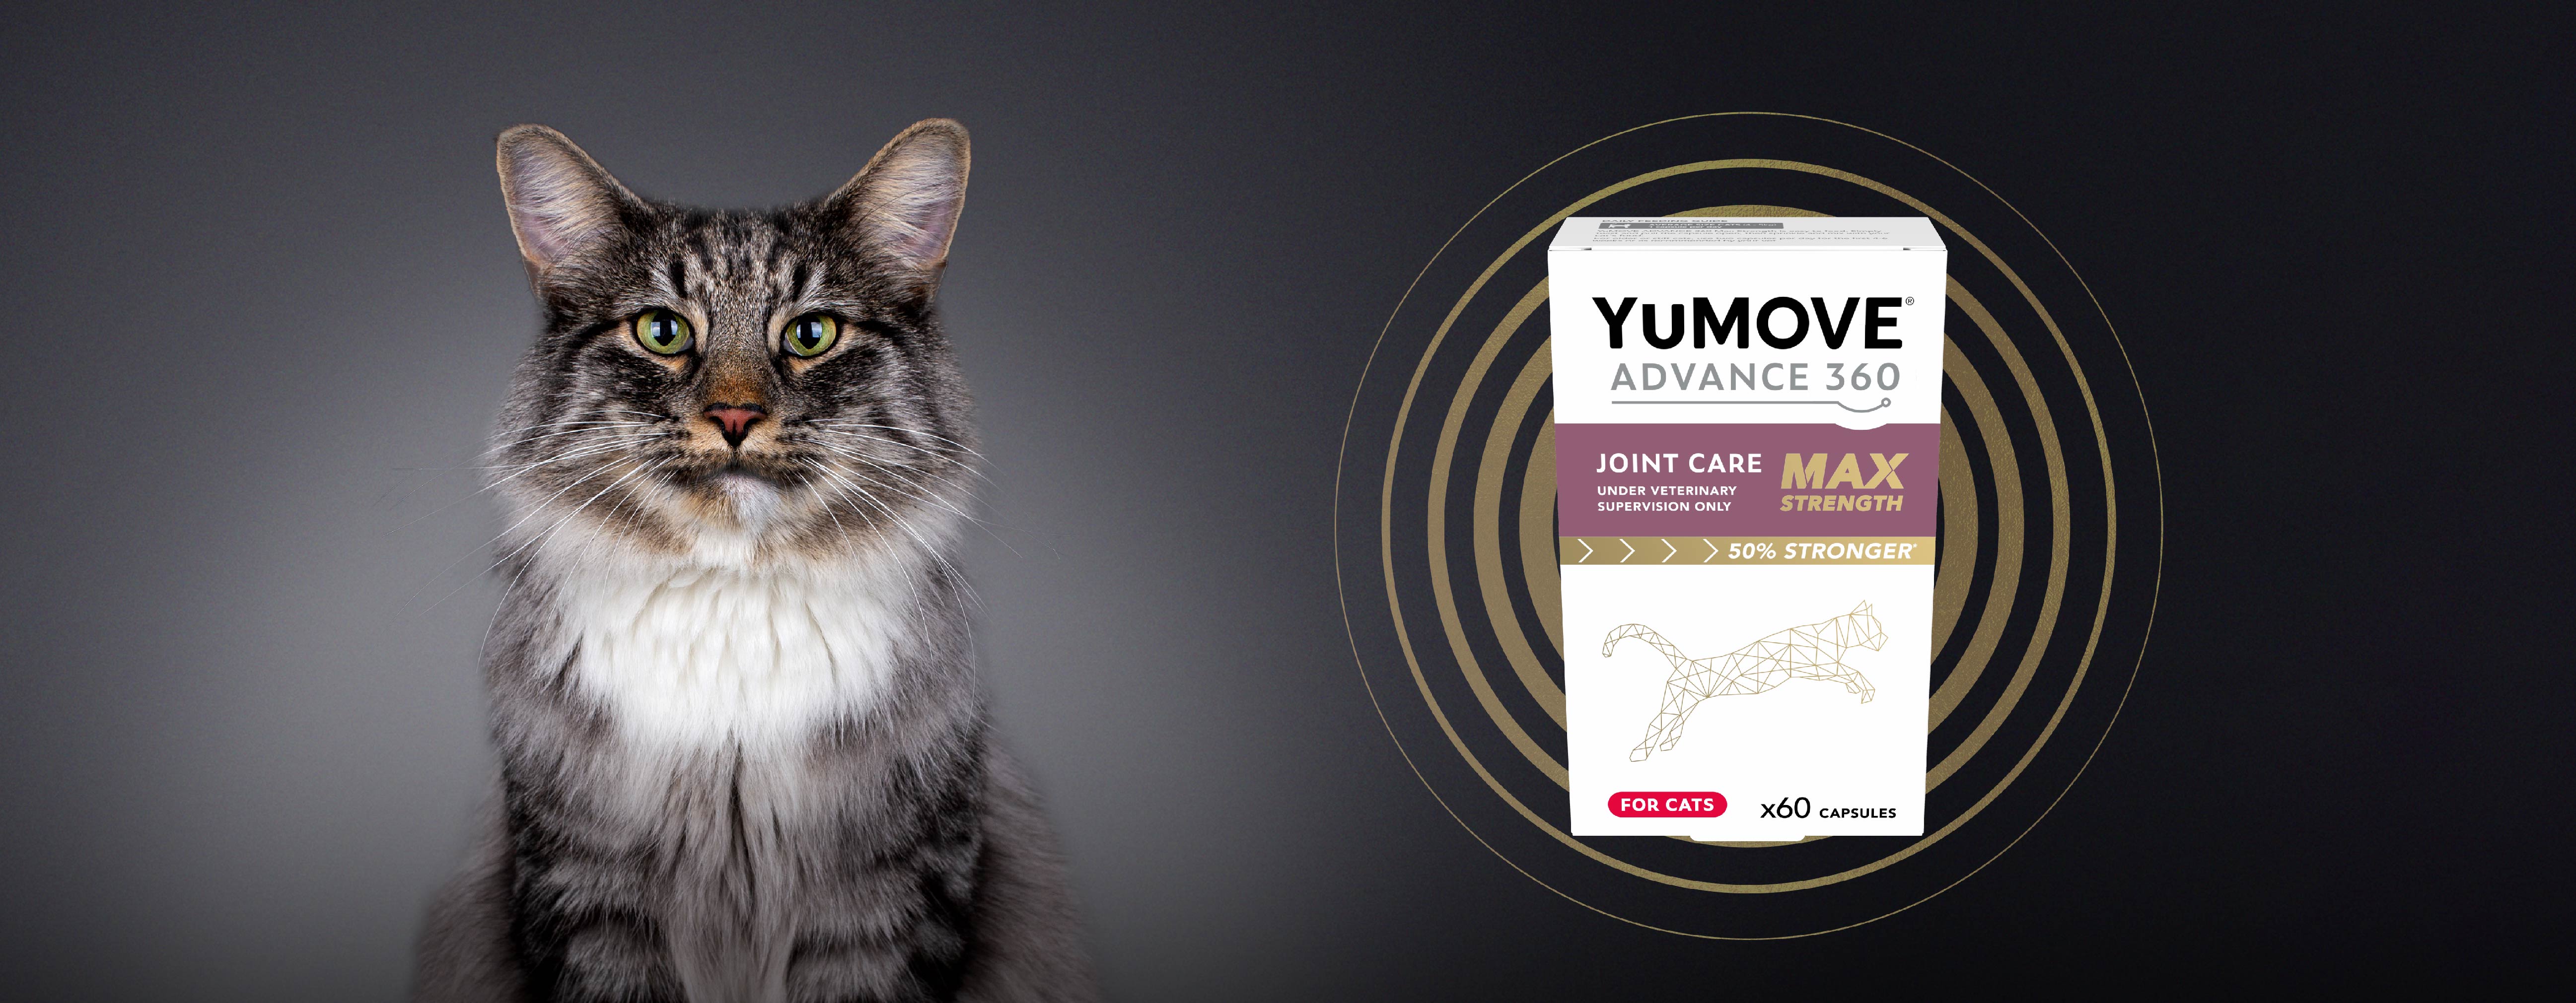 Introducing NEW YuMOVE ADVANCE 360 Max Strength for Cats